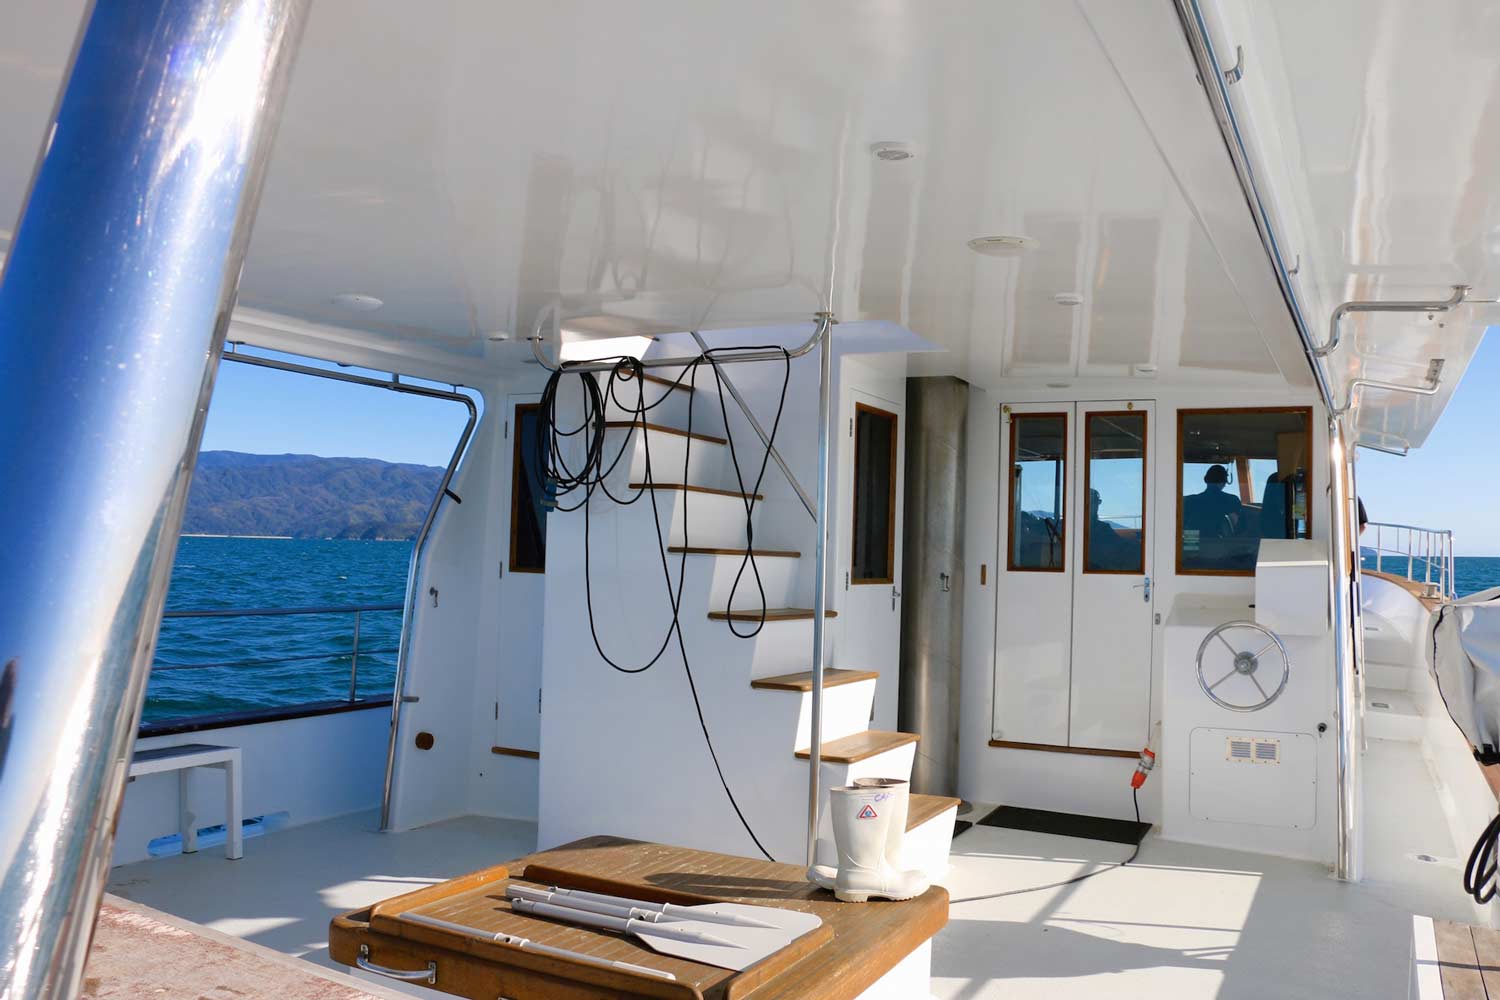 Take a break from the sun under shade on the Galileo's spacious rear deck